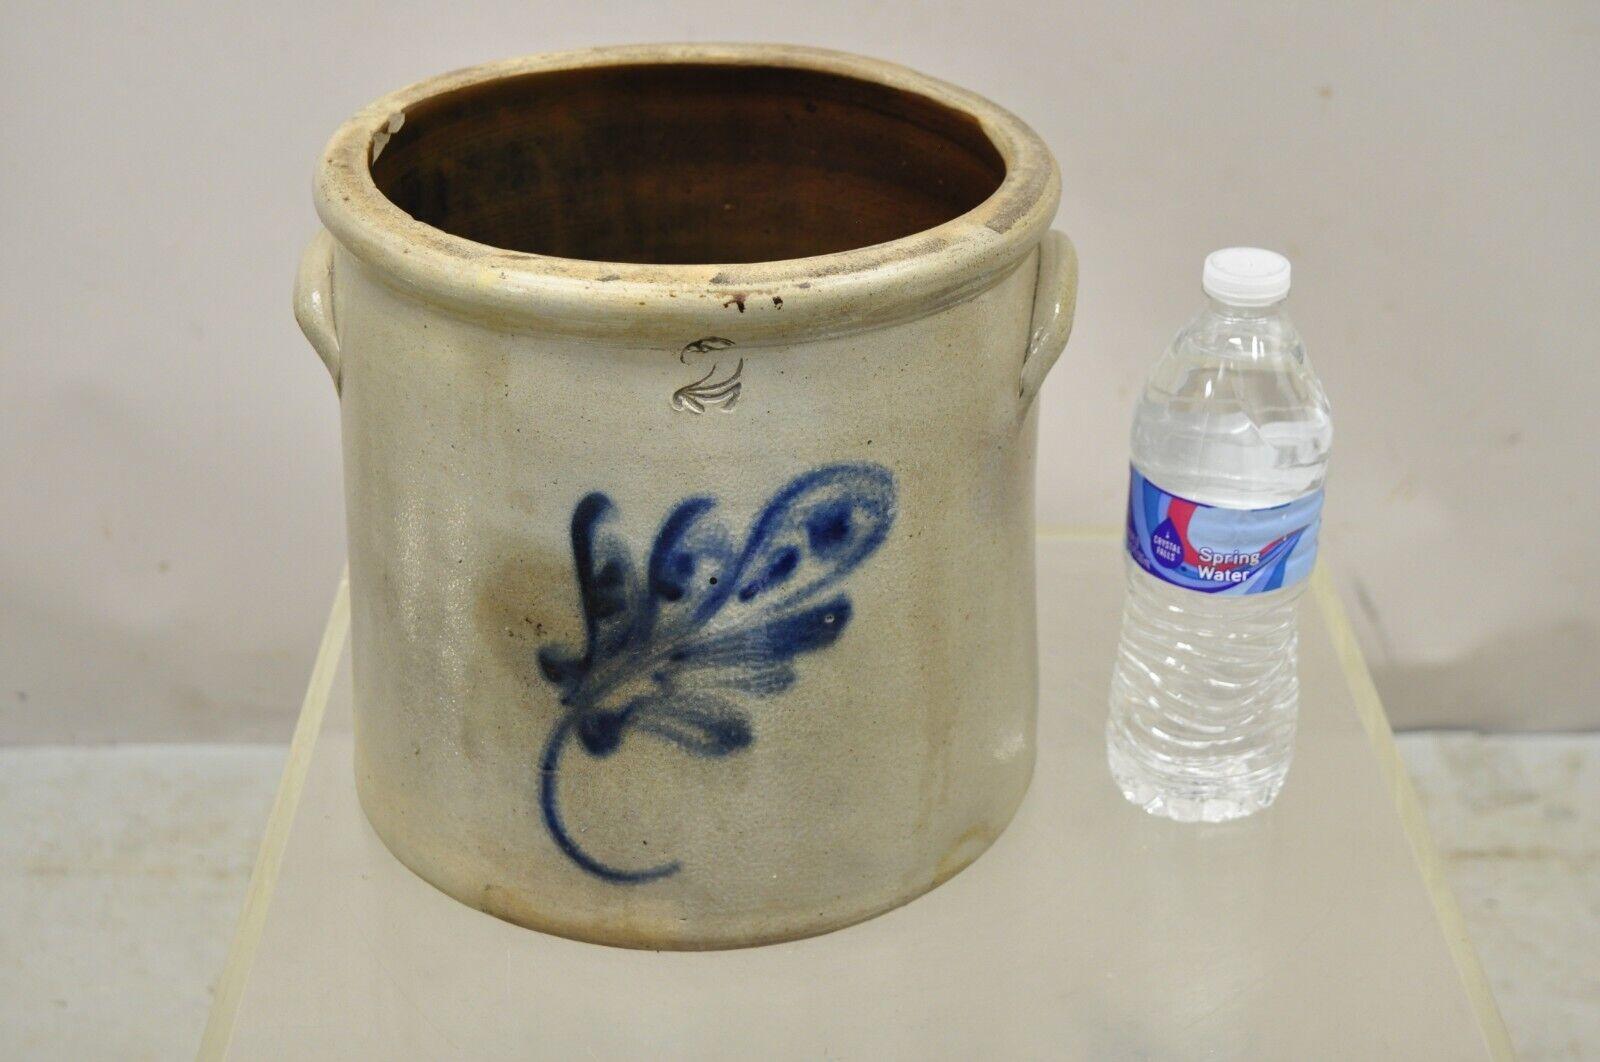 https://a.1stdibscdn.com/antique-stoneware-two-gallon-crock-with-cobalt-blue-slip-trailed-floral-design-for-sale-picture-2/f_9341/f_366032321697218526687/2_master.jpg